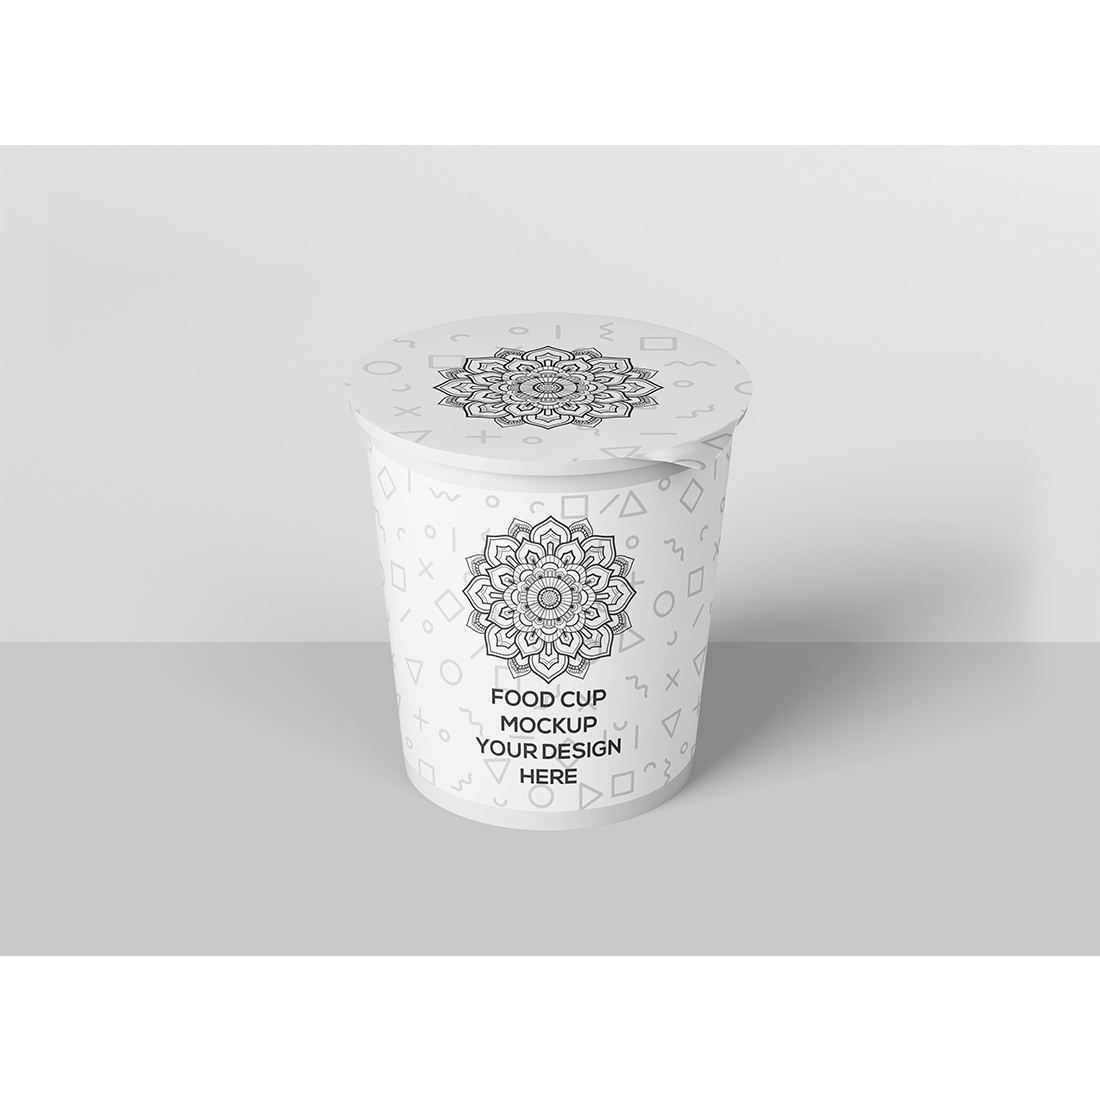 Food Cup Mockup cover image.